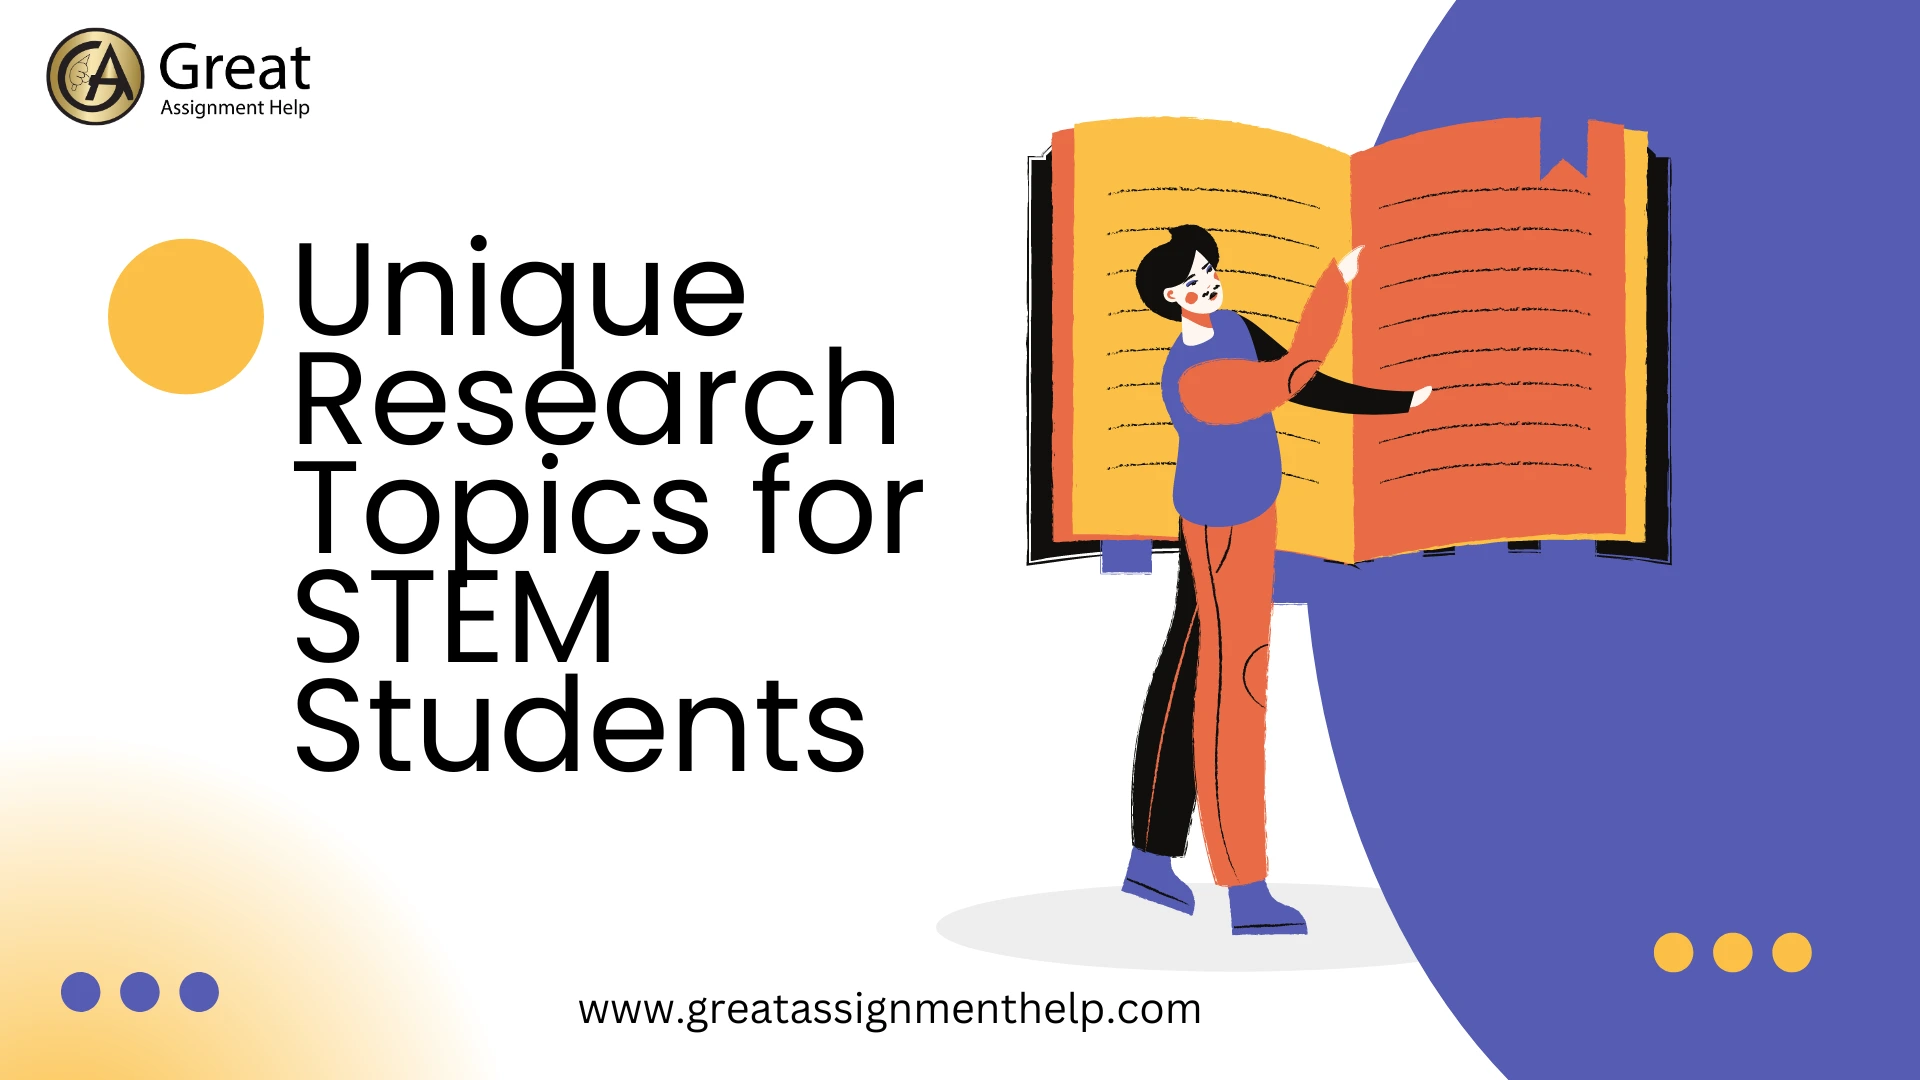 easy experimental research topics for stem students